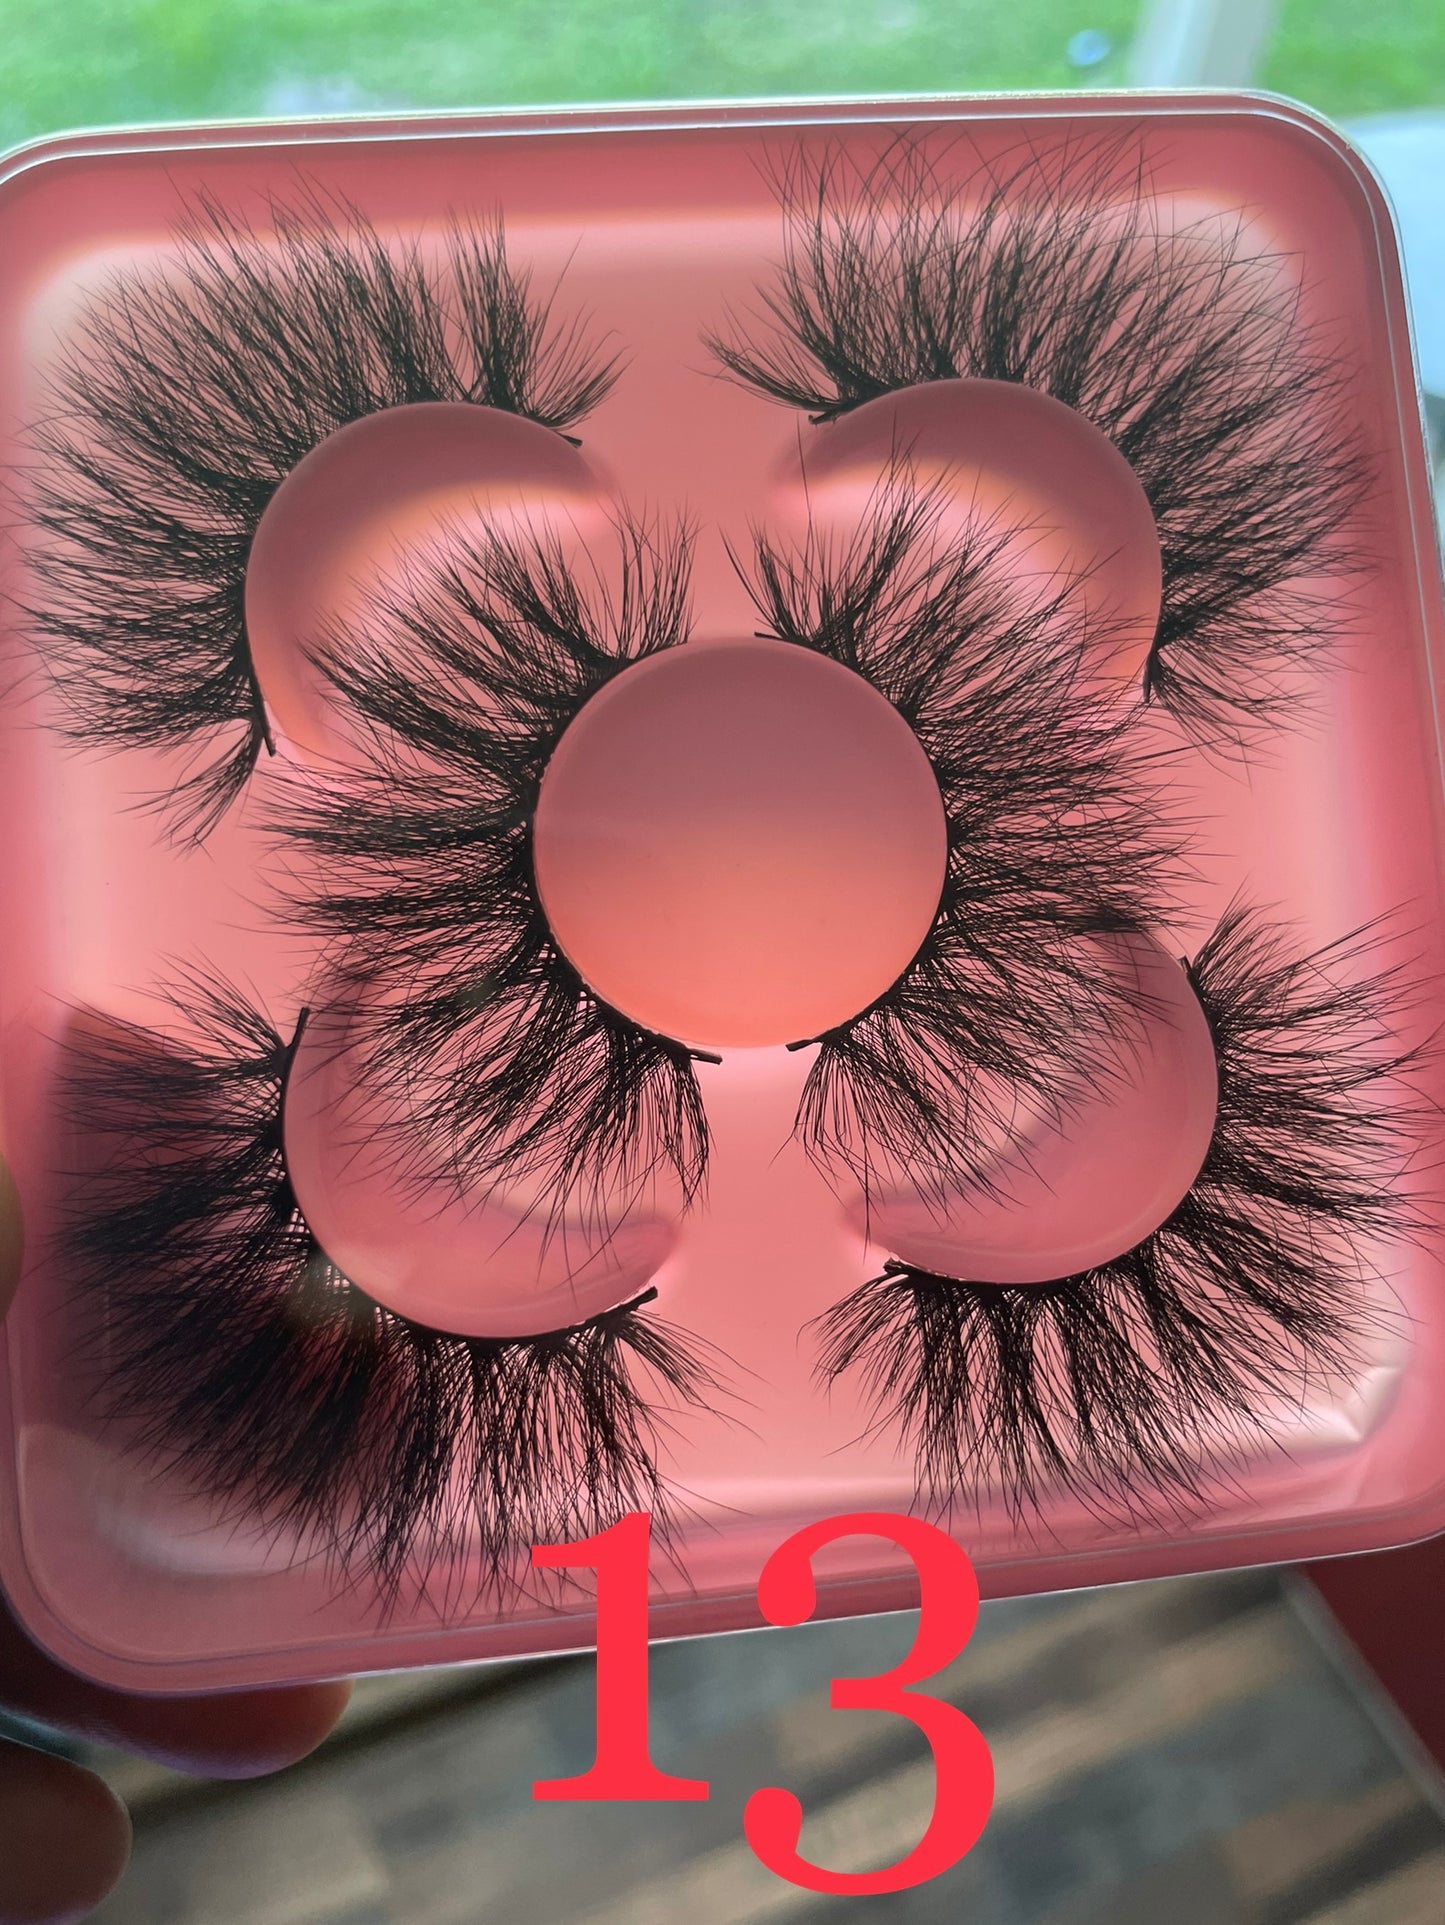 The TripIe pack lashes